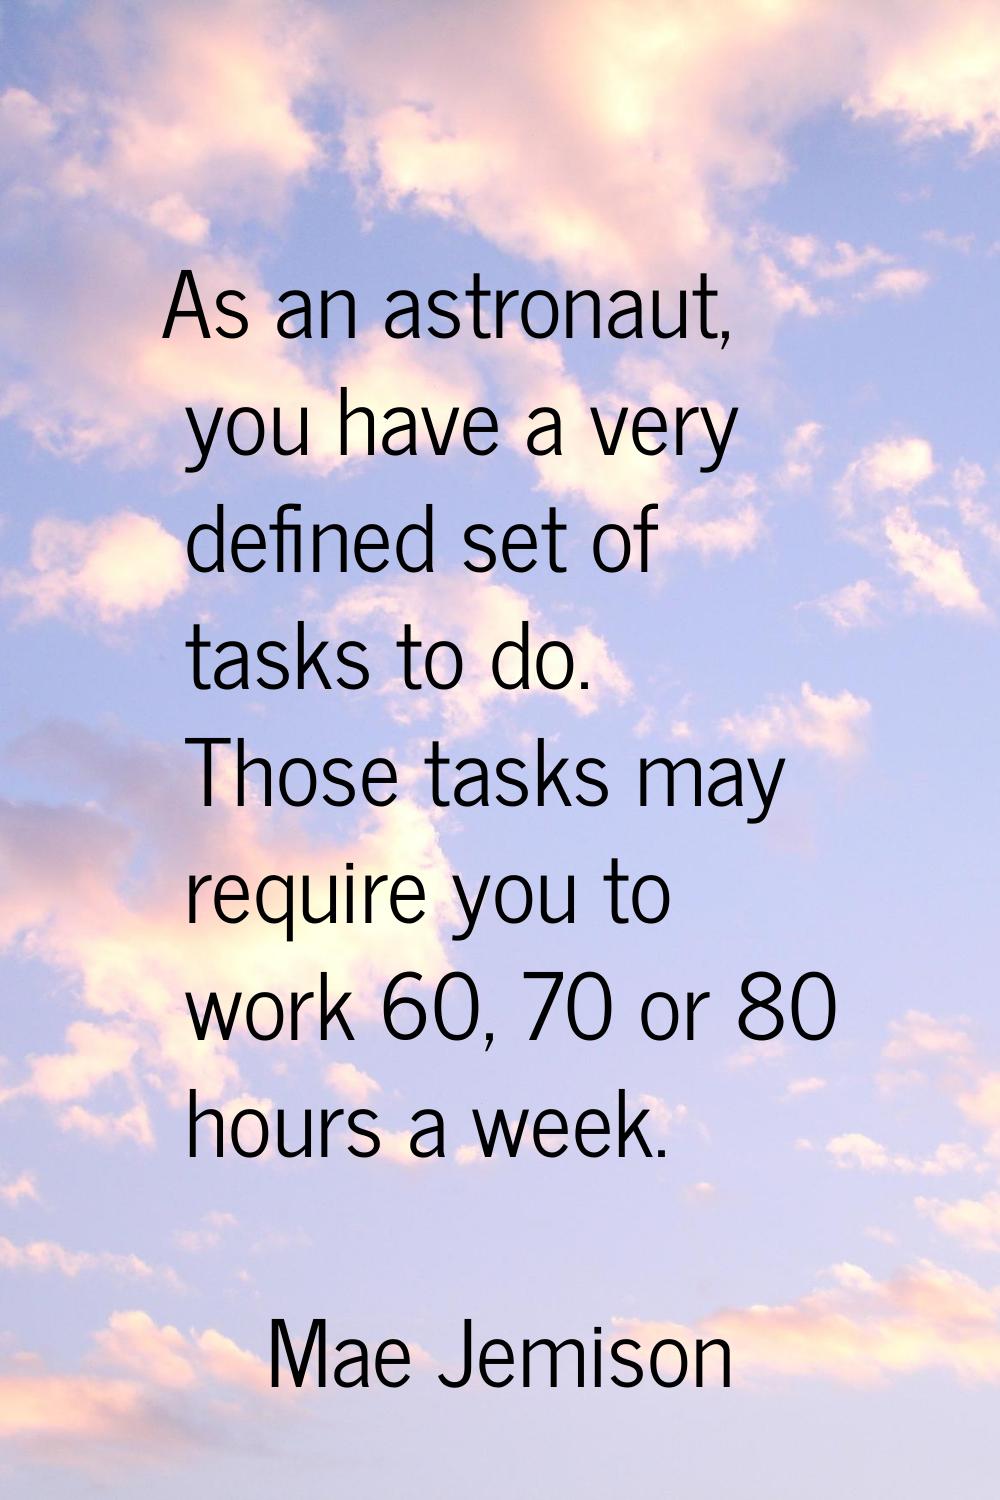 As an astronaut, you have a very defined set of tasks to do. Those tasks may require you to work 60